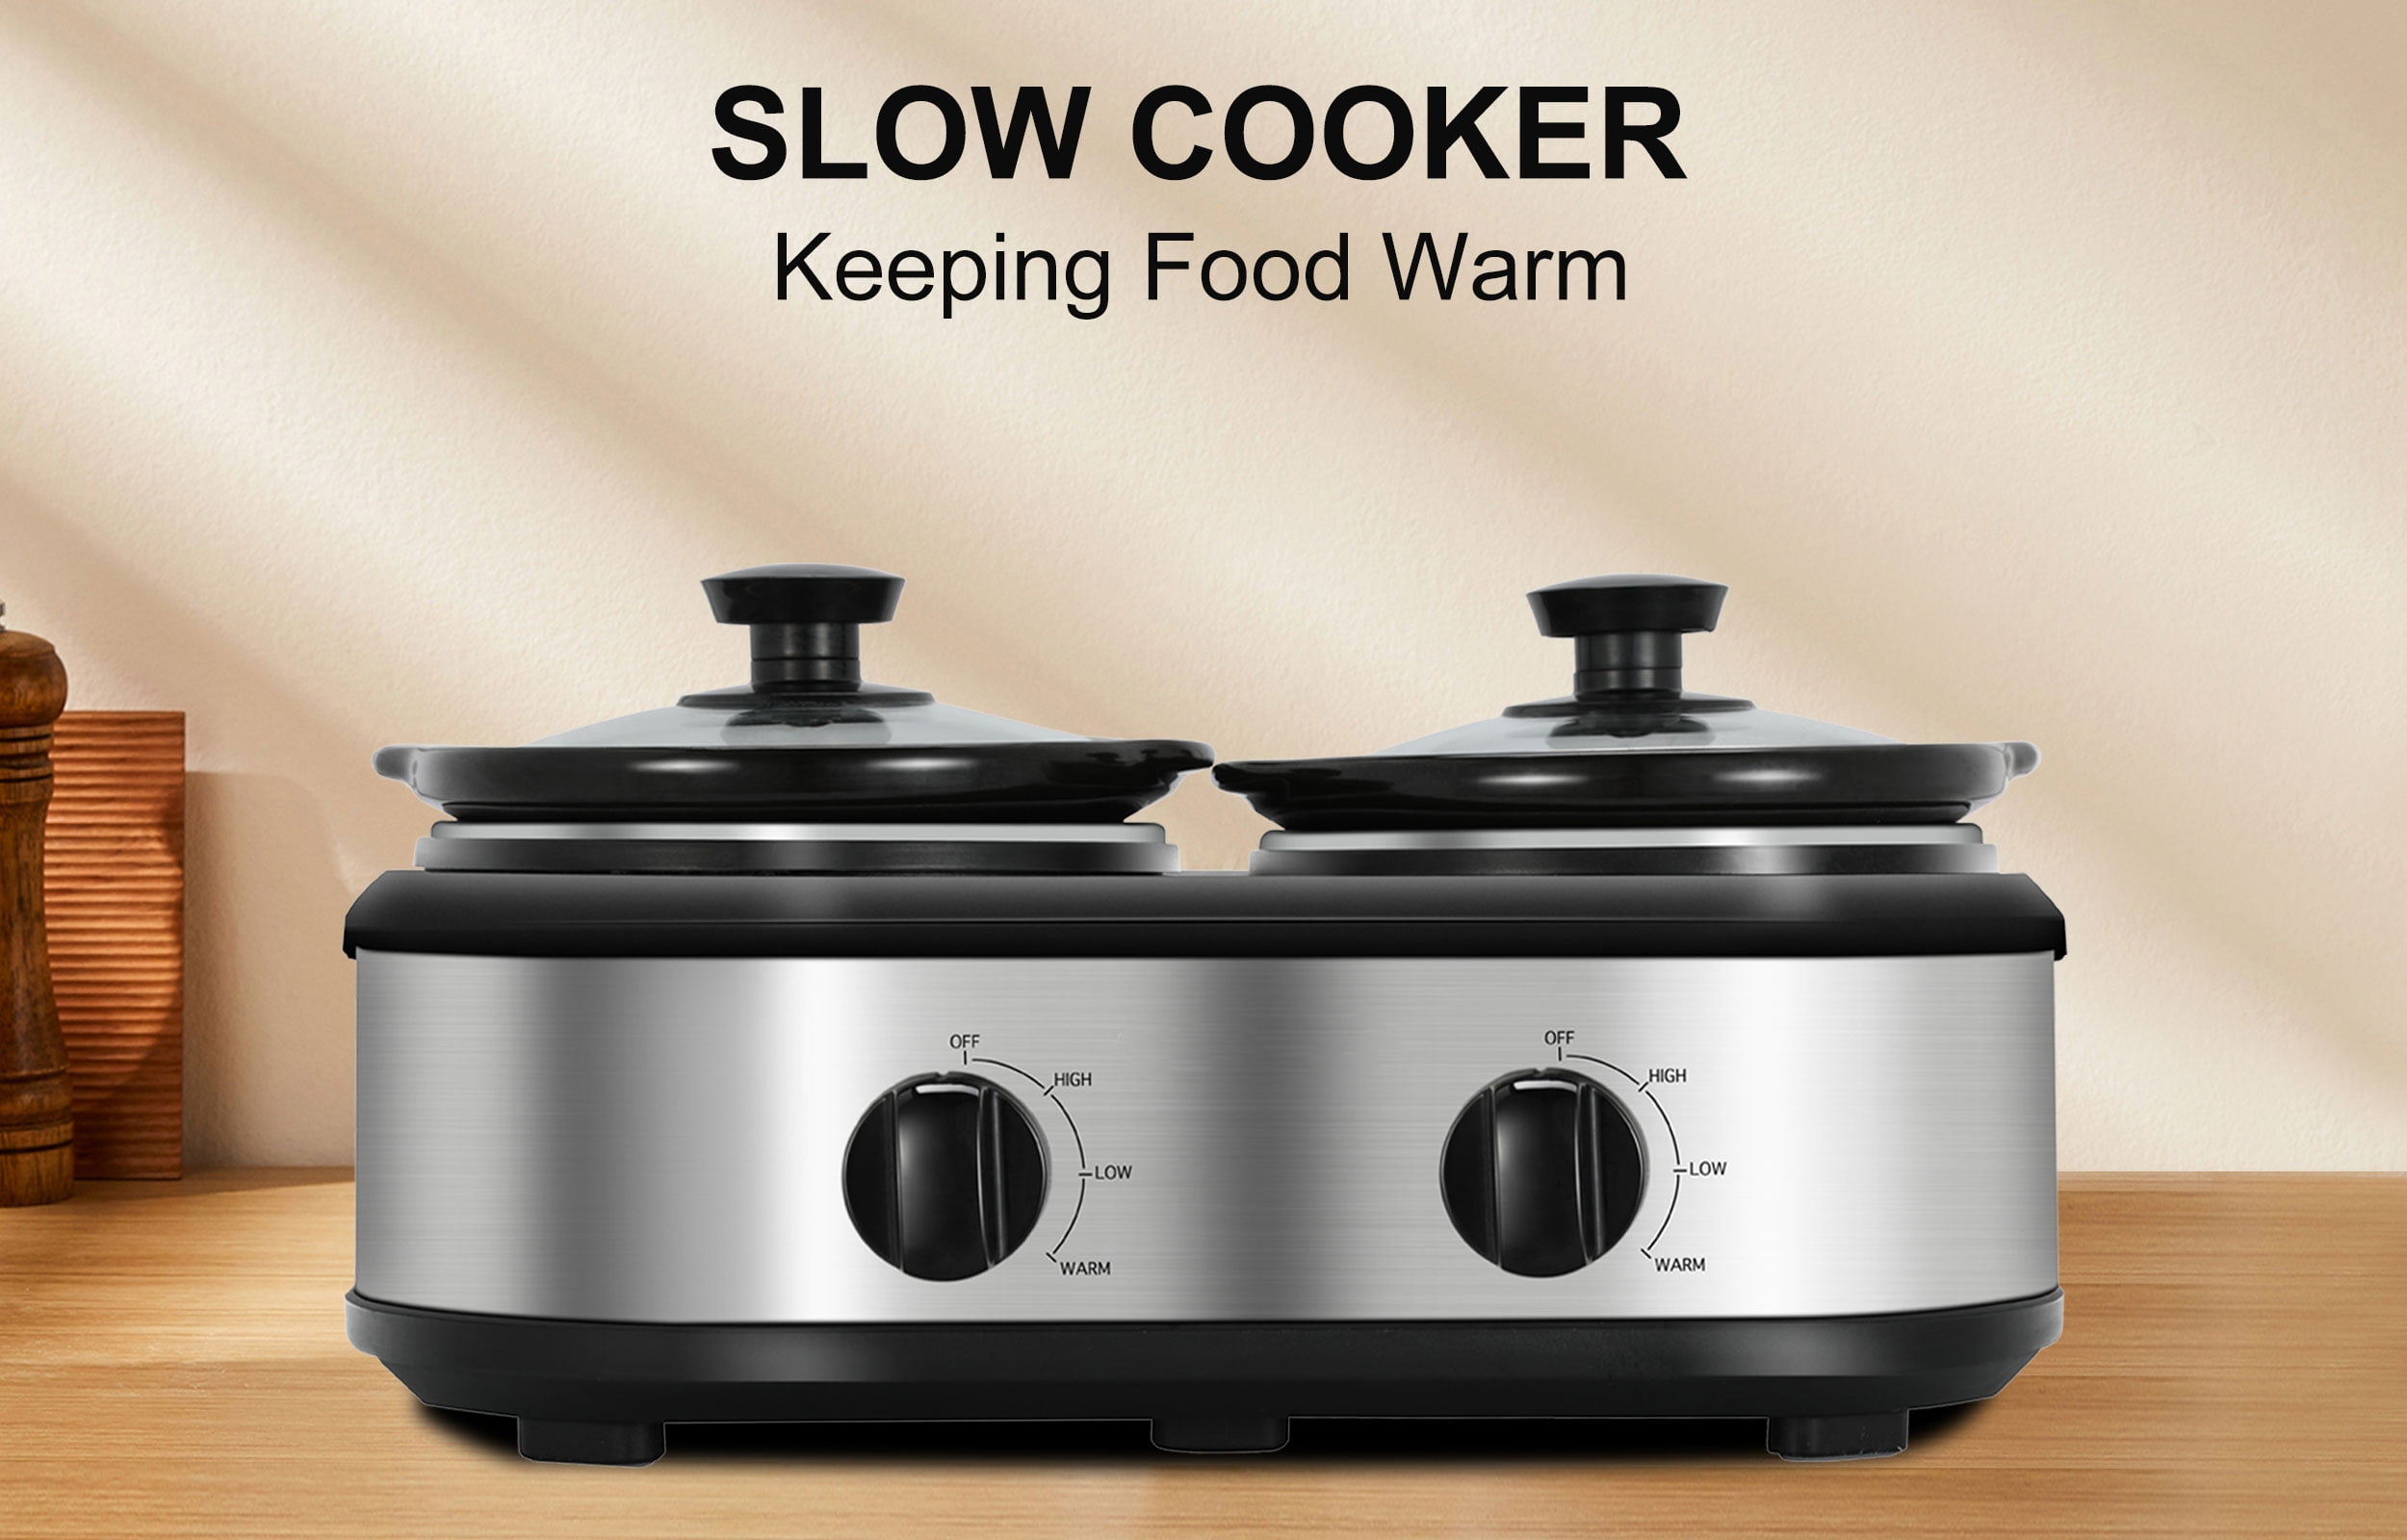 Entertaining: 2-Quart Slow Cookers & Above